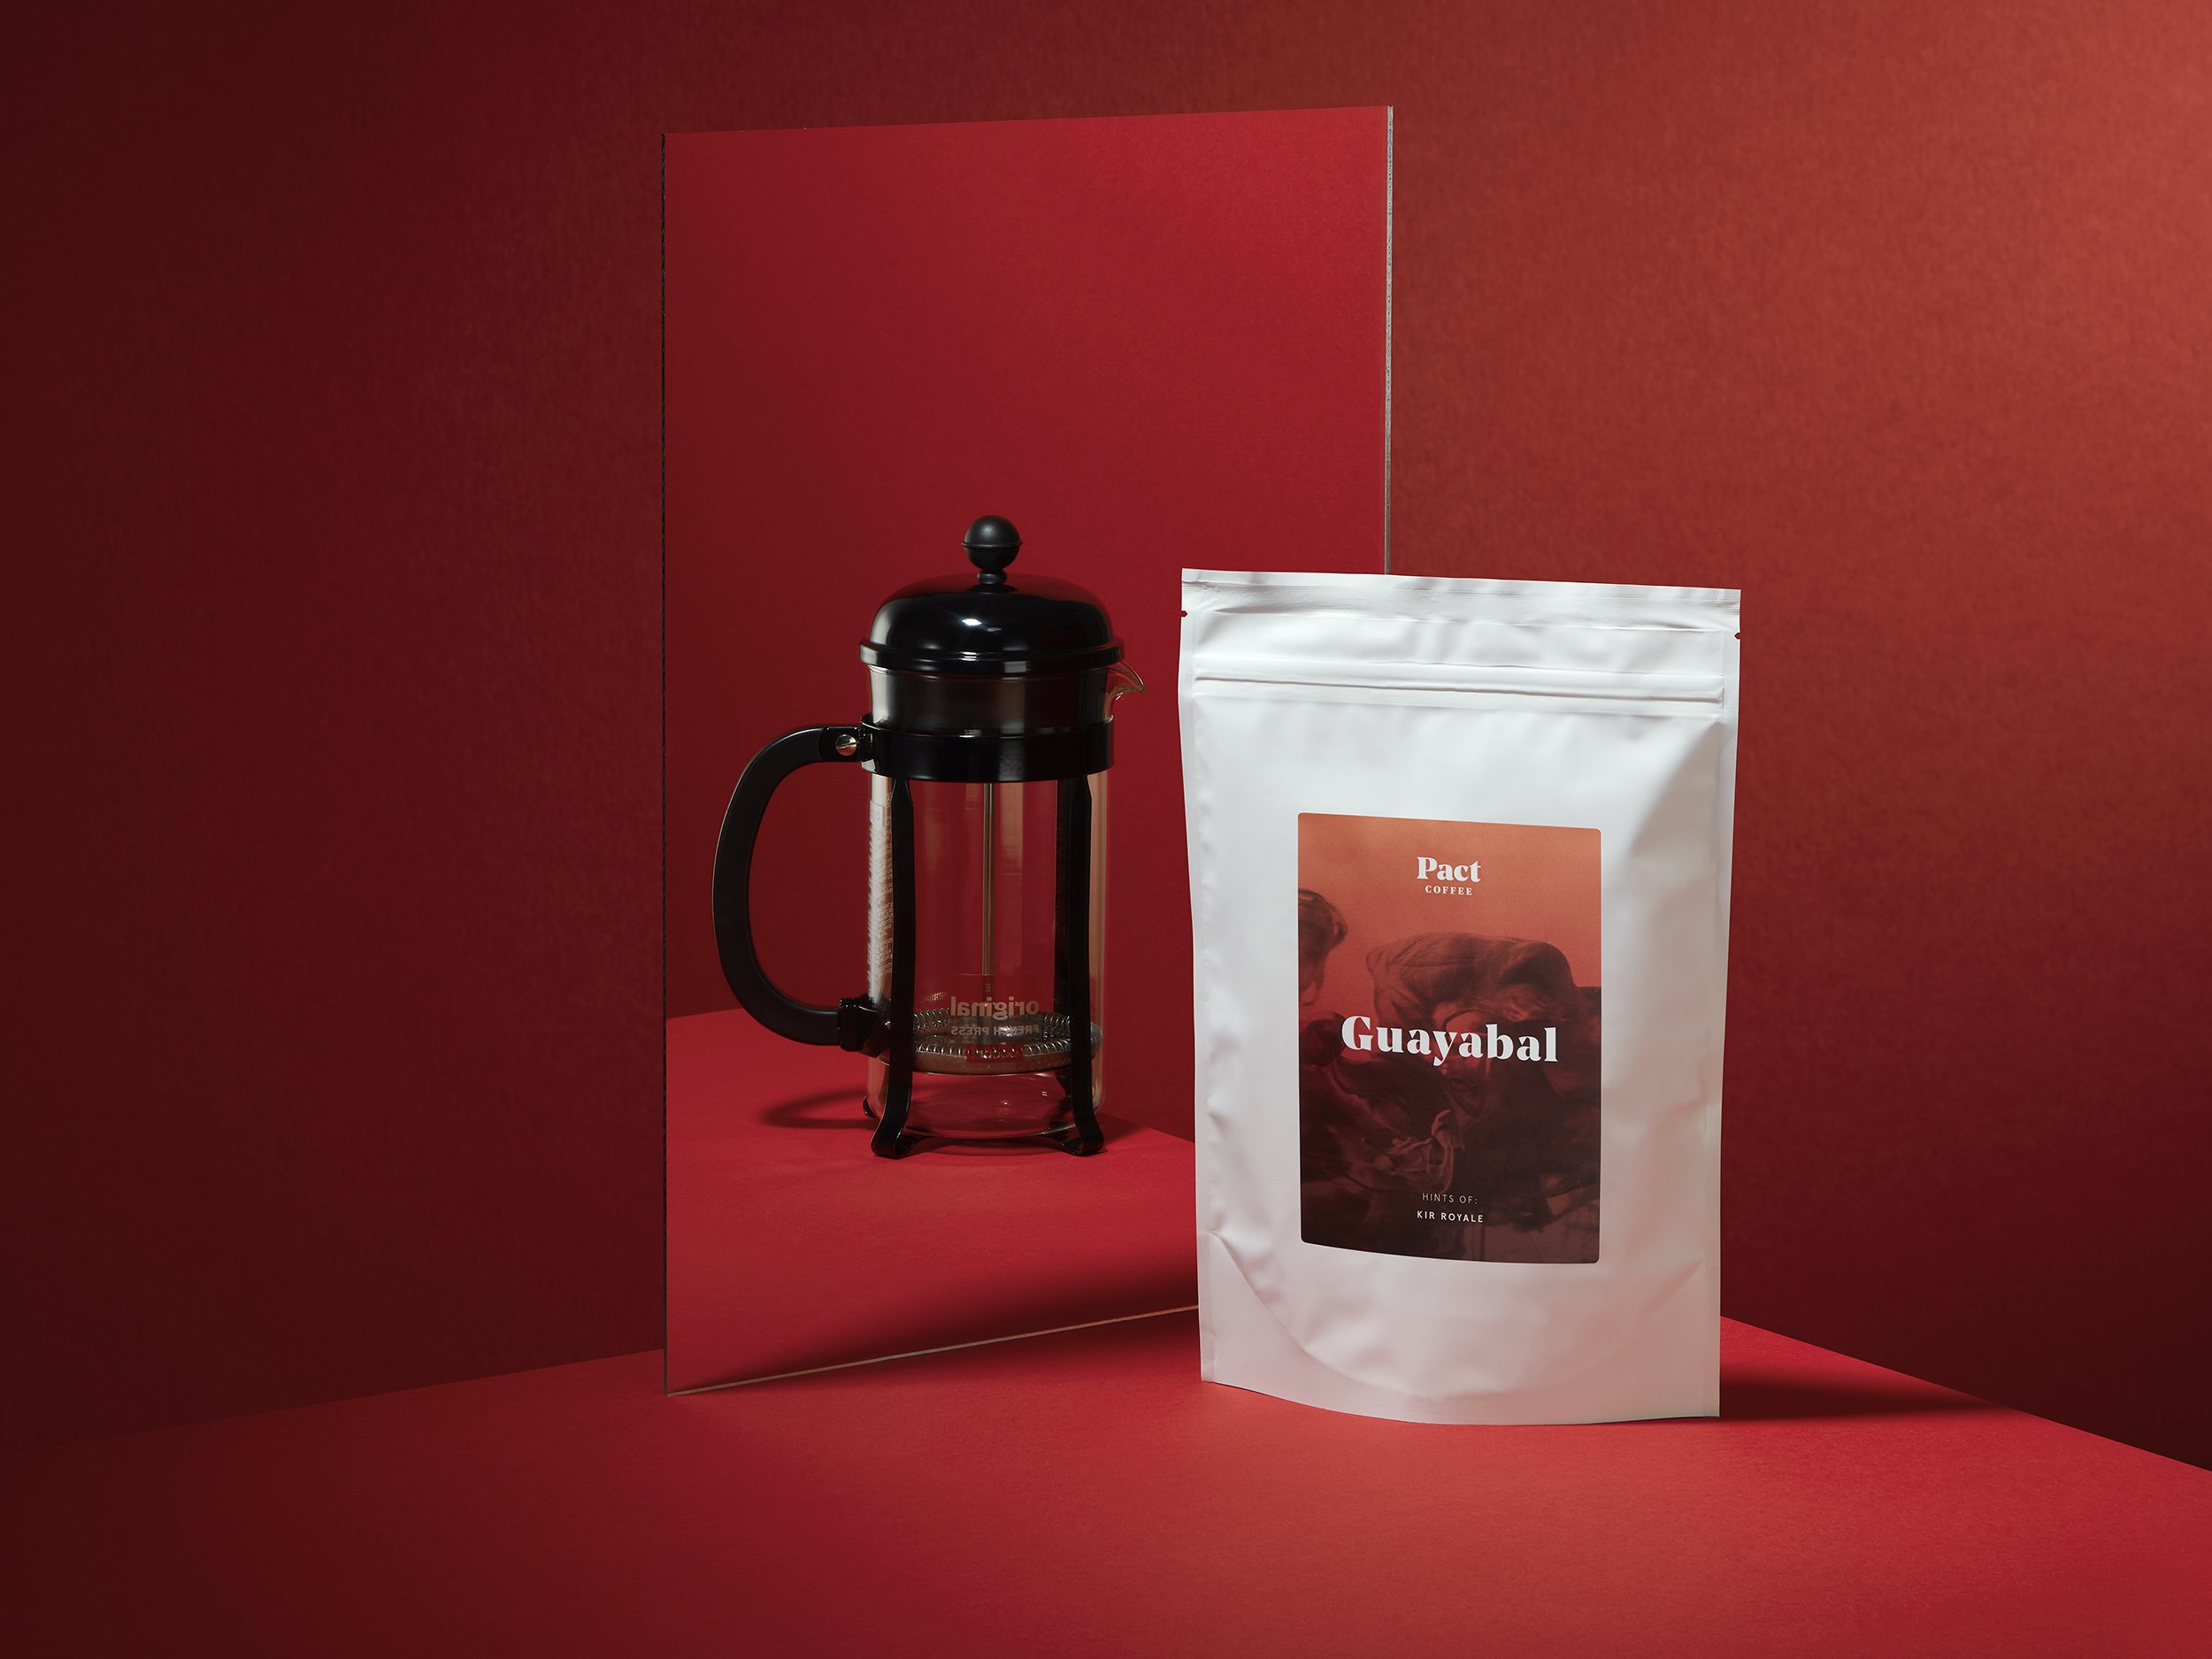 Pact Coffee Guayabal - Still life photography by product photographer Simon Lyle Ritchie